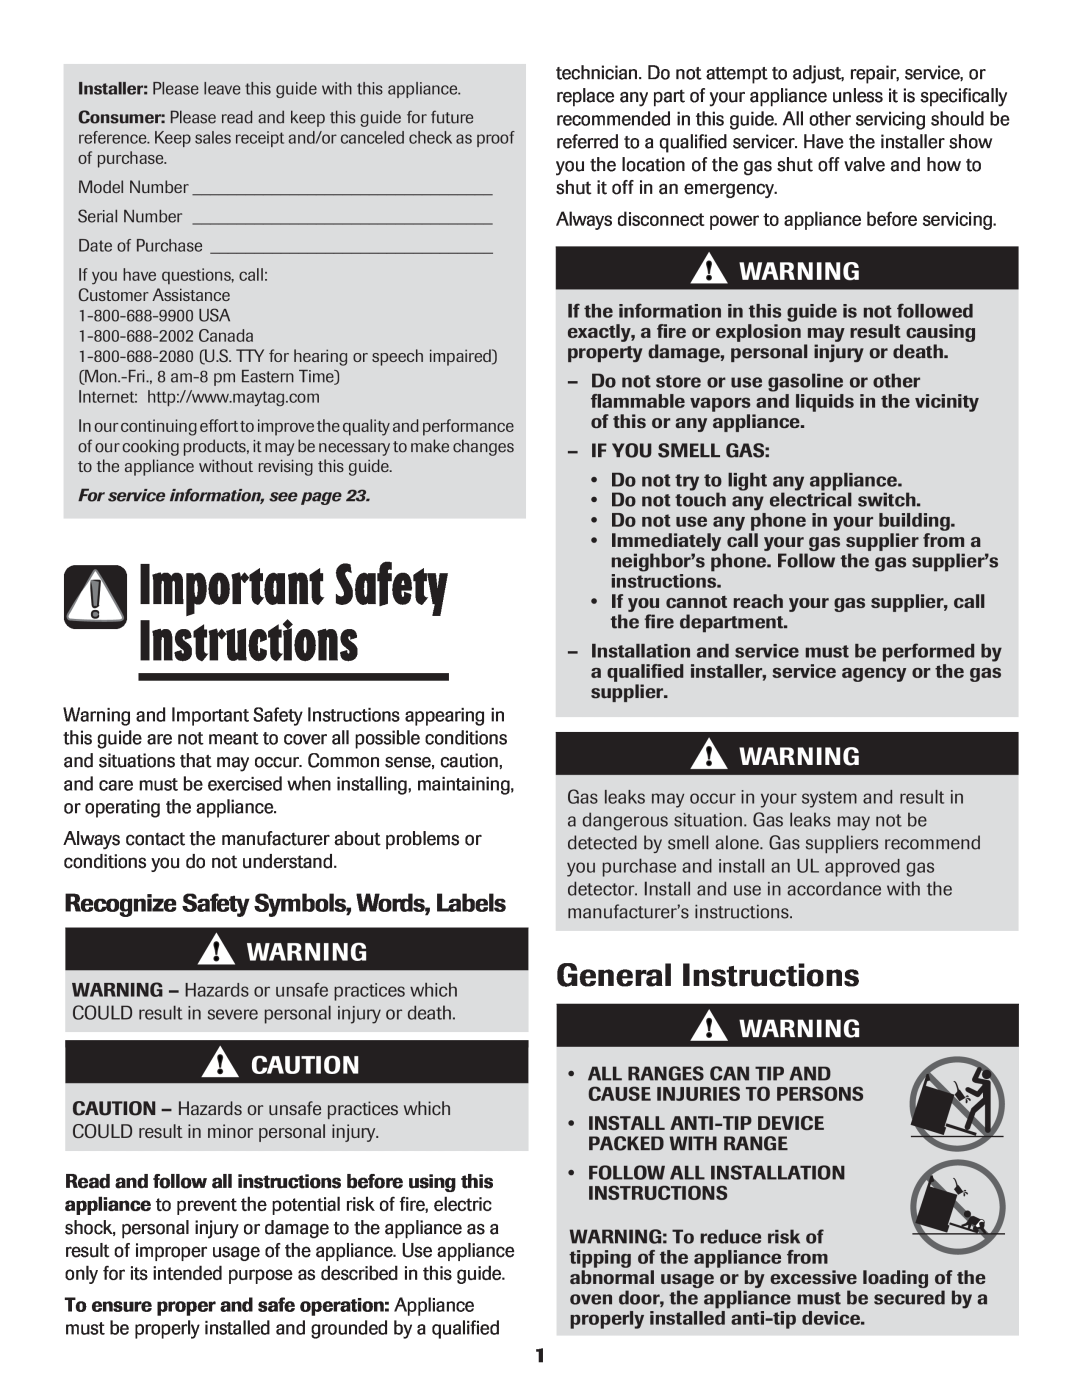 Magic Chef 500 Important Safety, General Instructions, Recognize Safety Symbols, Words, Labels 